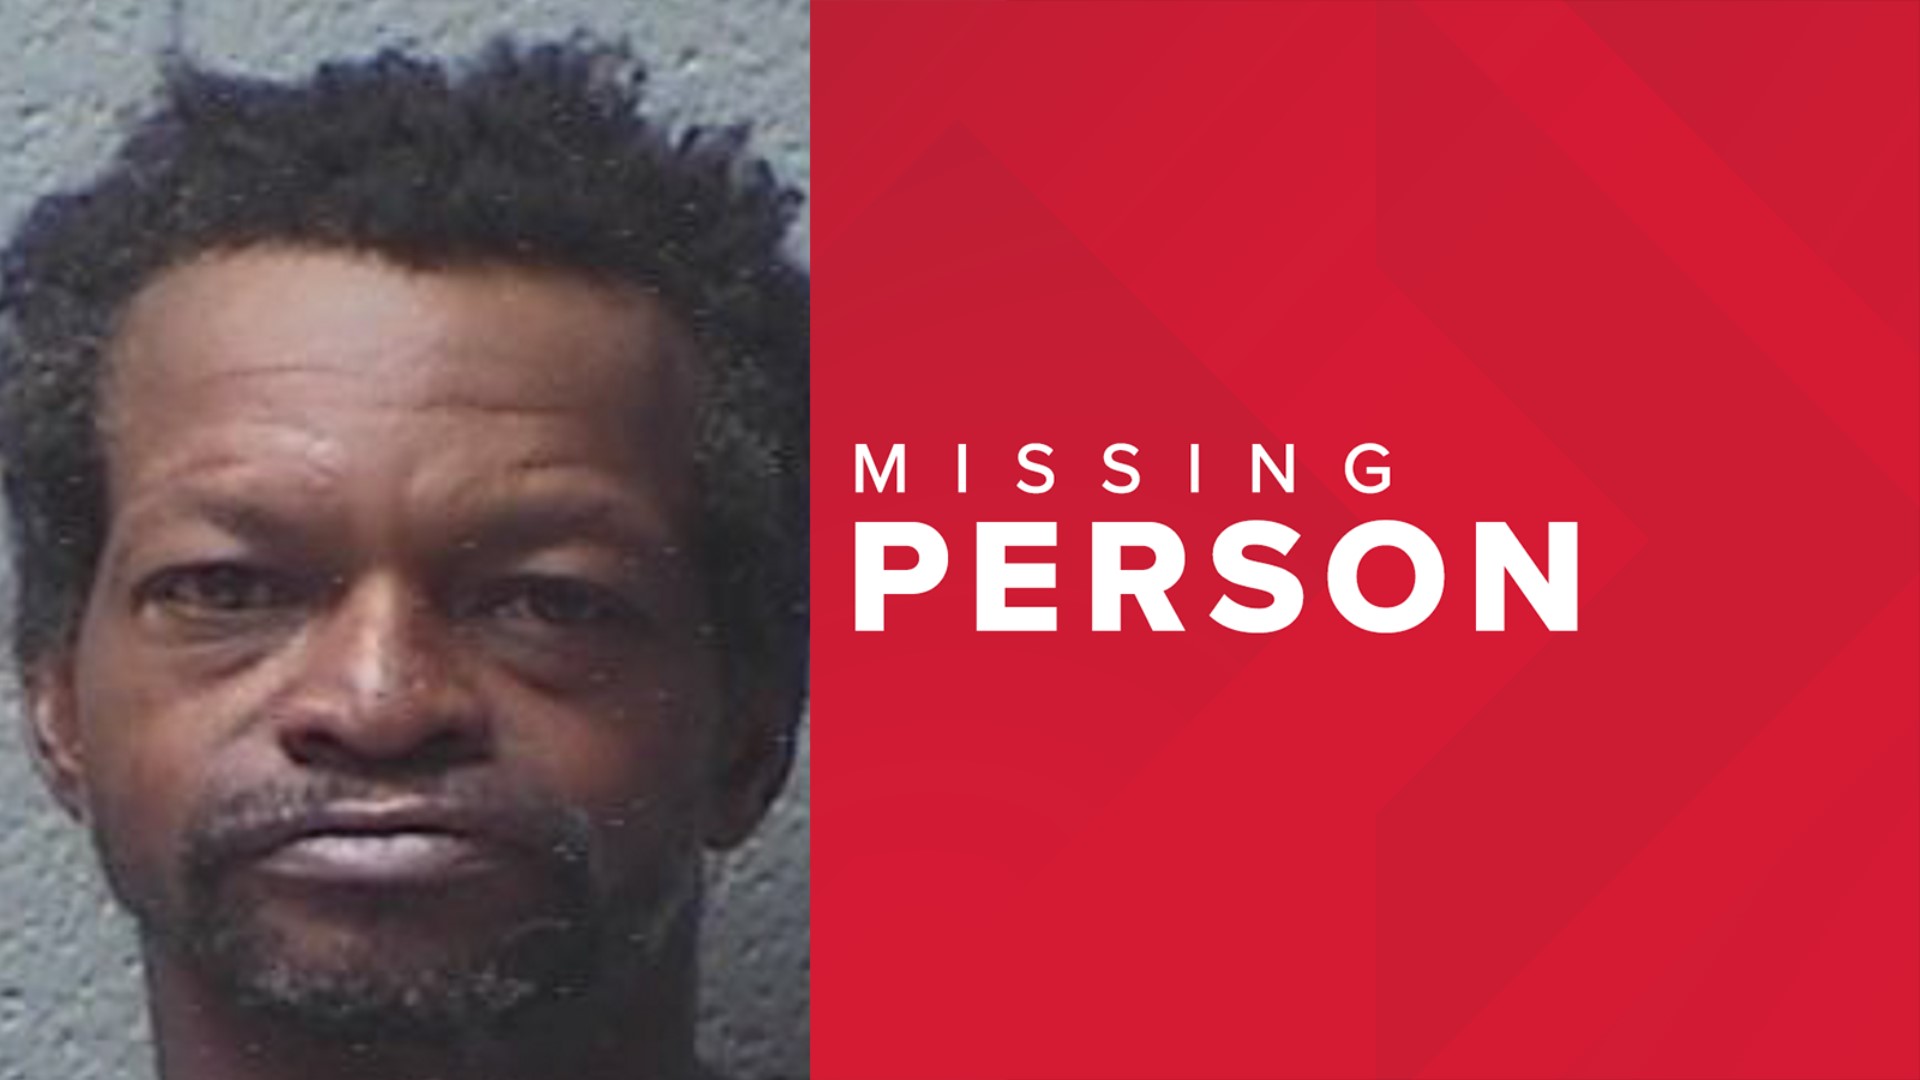 While his family hasn't seen him since February, they've been told he may be in the Holly Hill or Charleston areas.